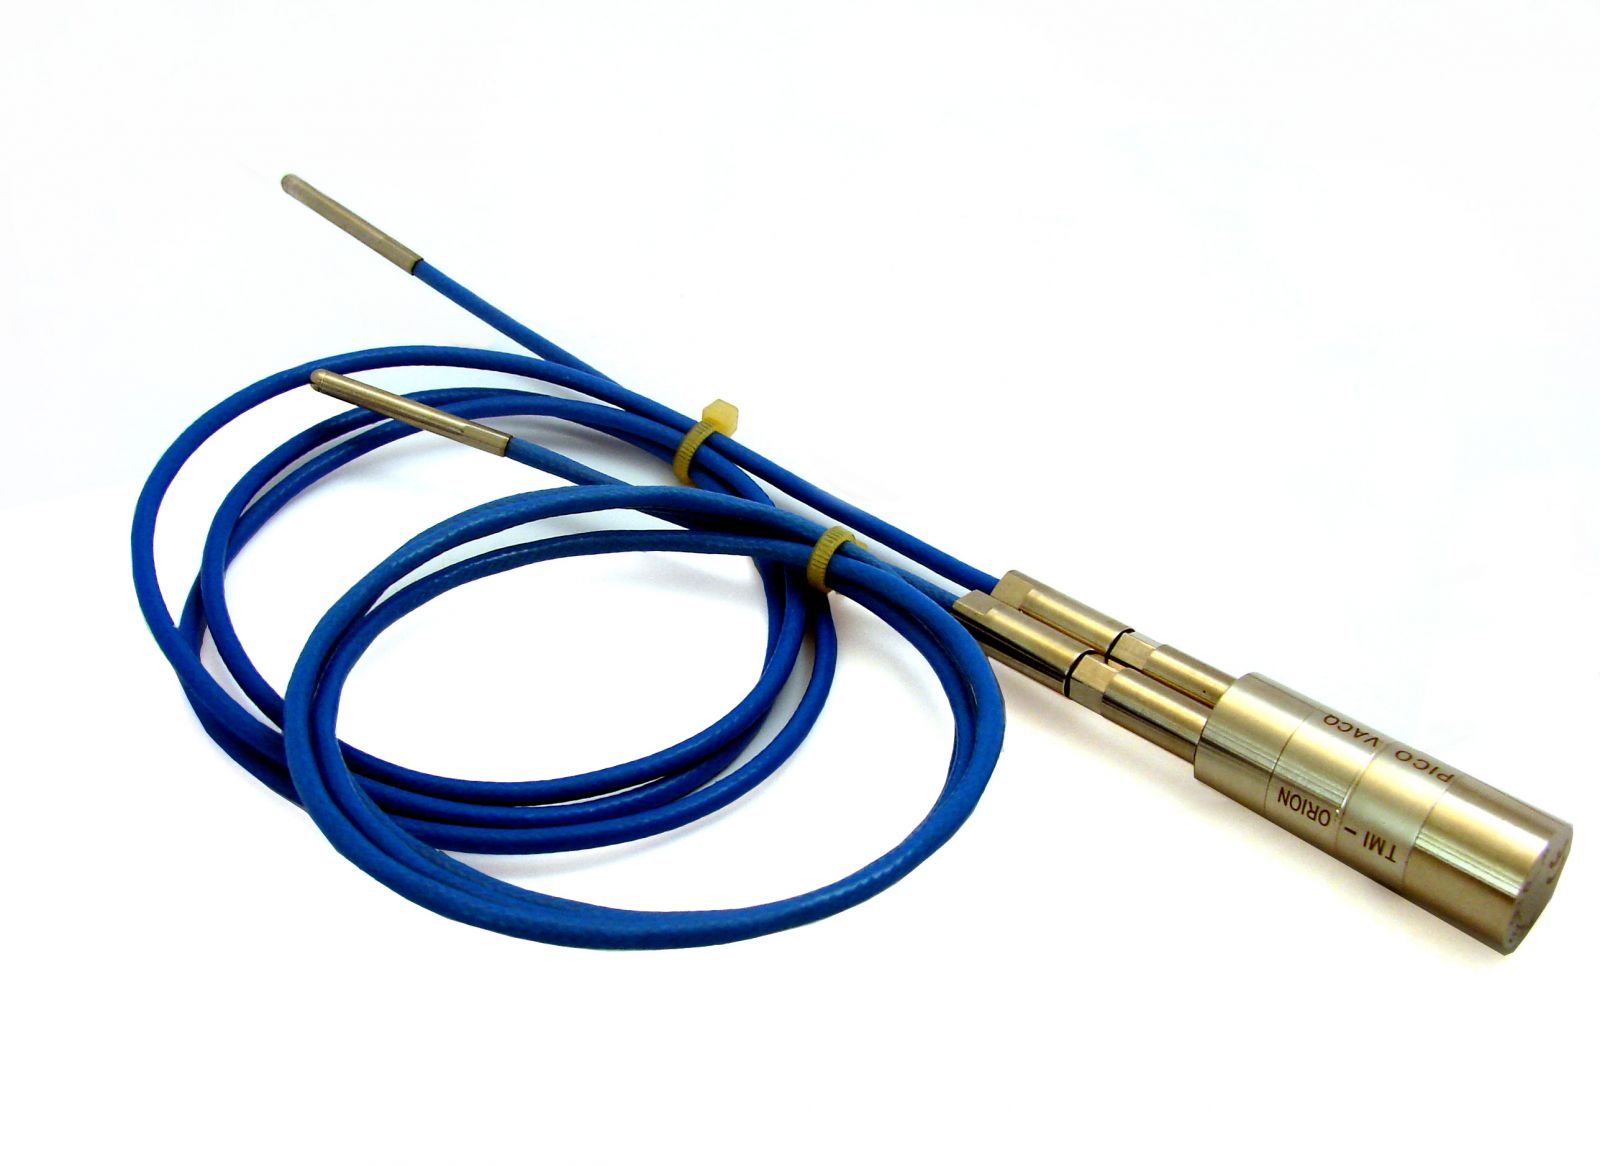 PicoVACQ 2Td with flexible probes